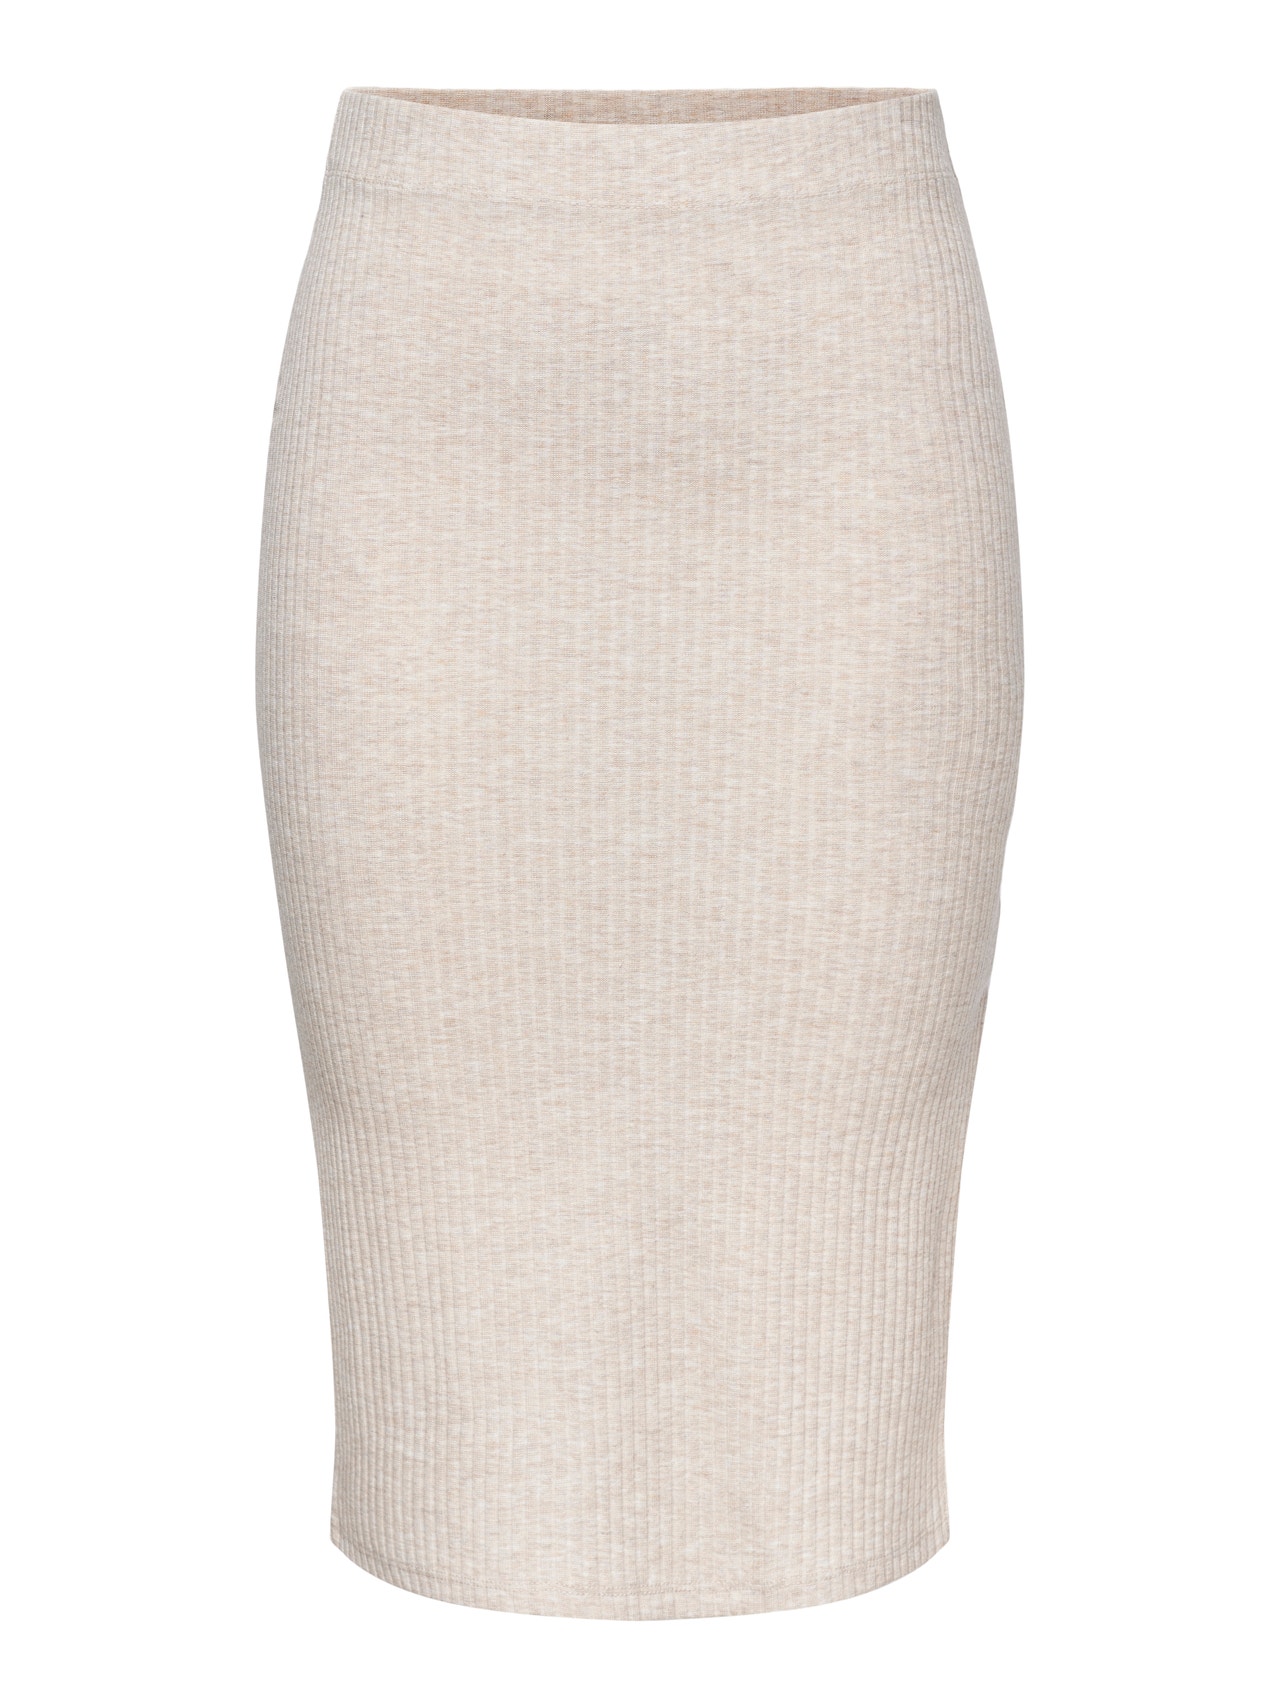 ONLY Short skirt -Pumice Stone - 15233600